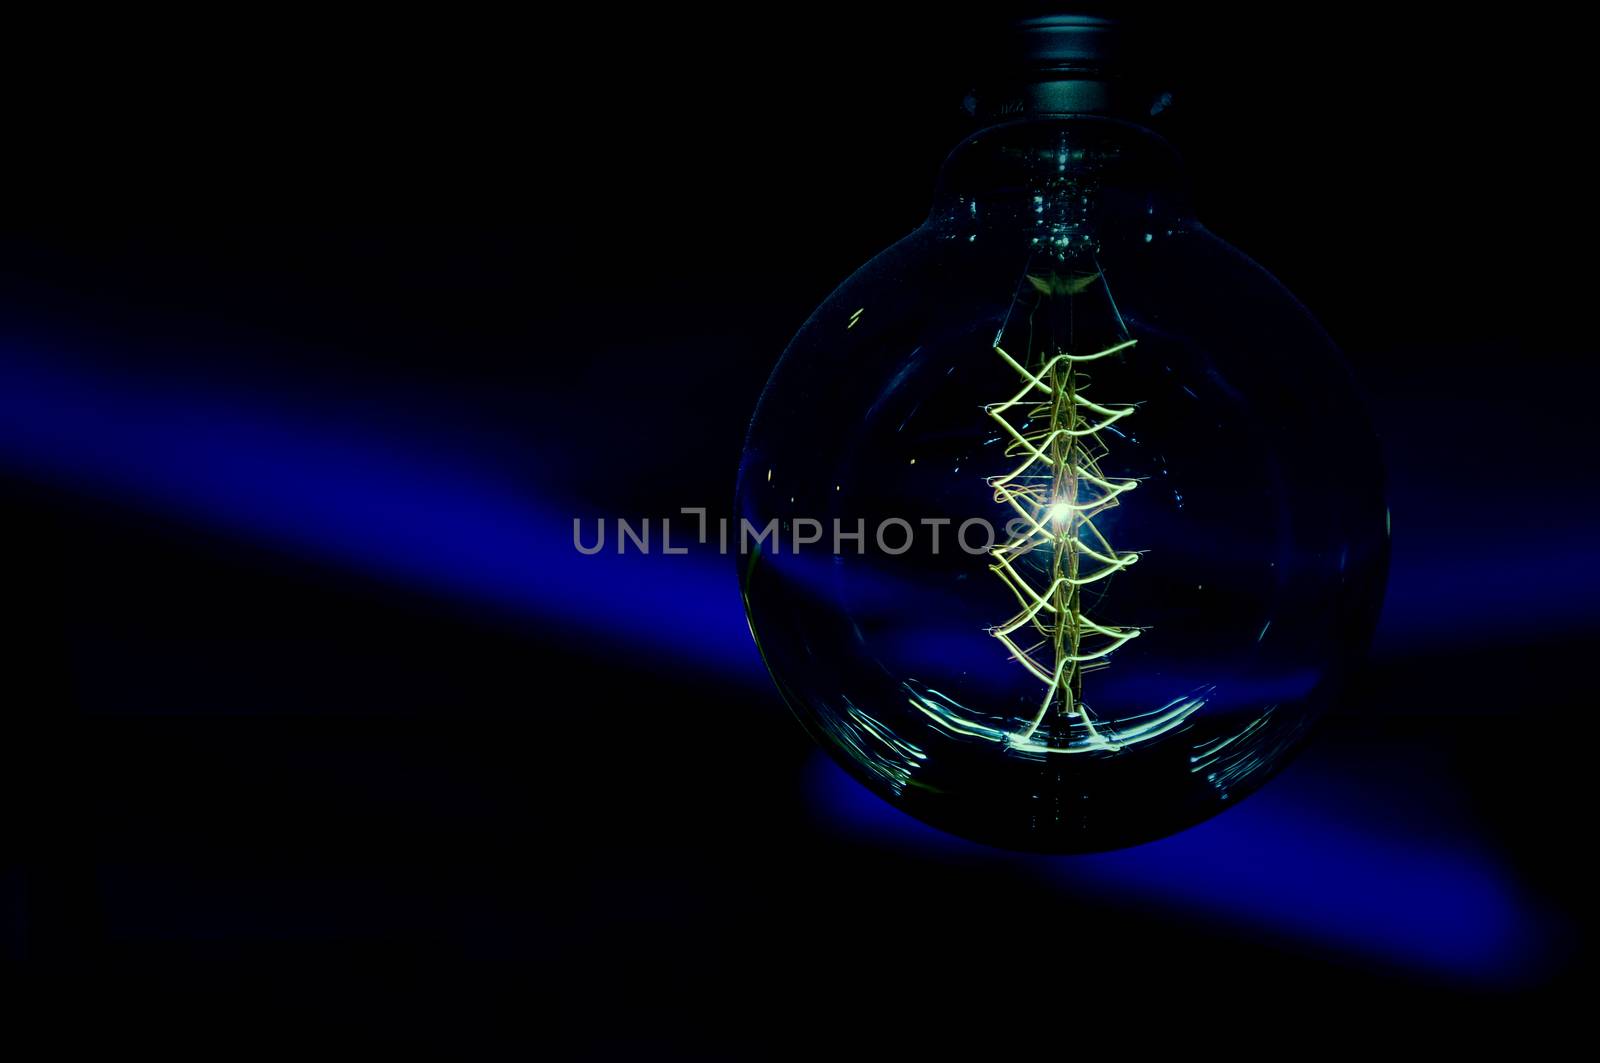 Bright electric light or bulb on a dark background. a photo